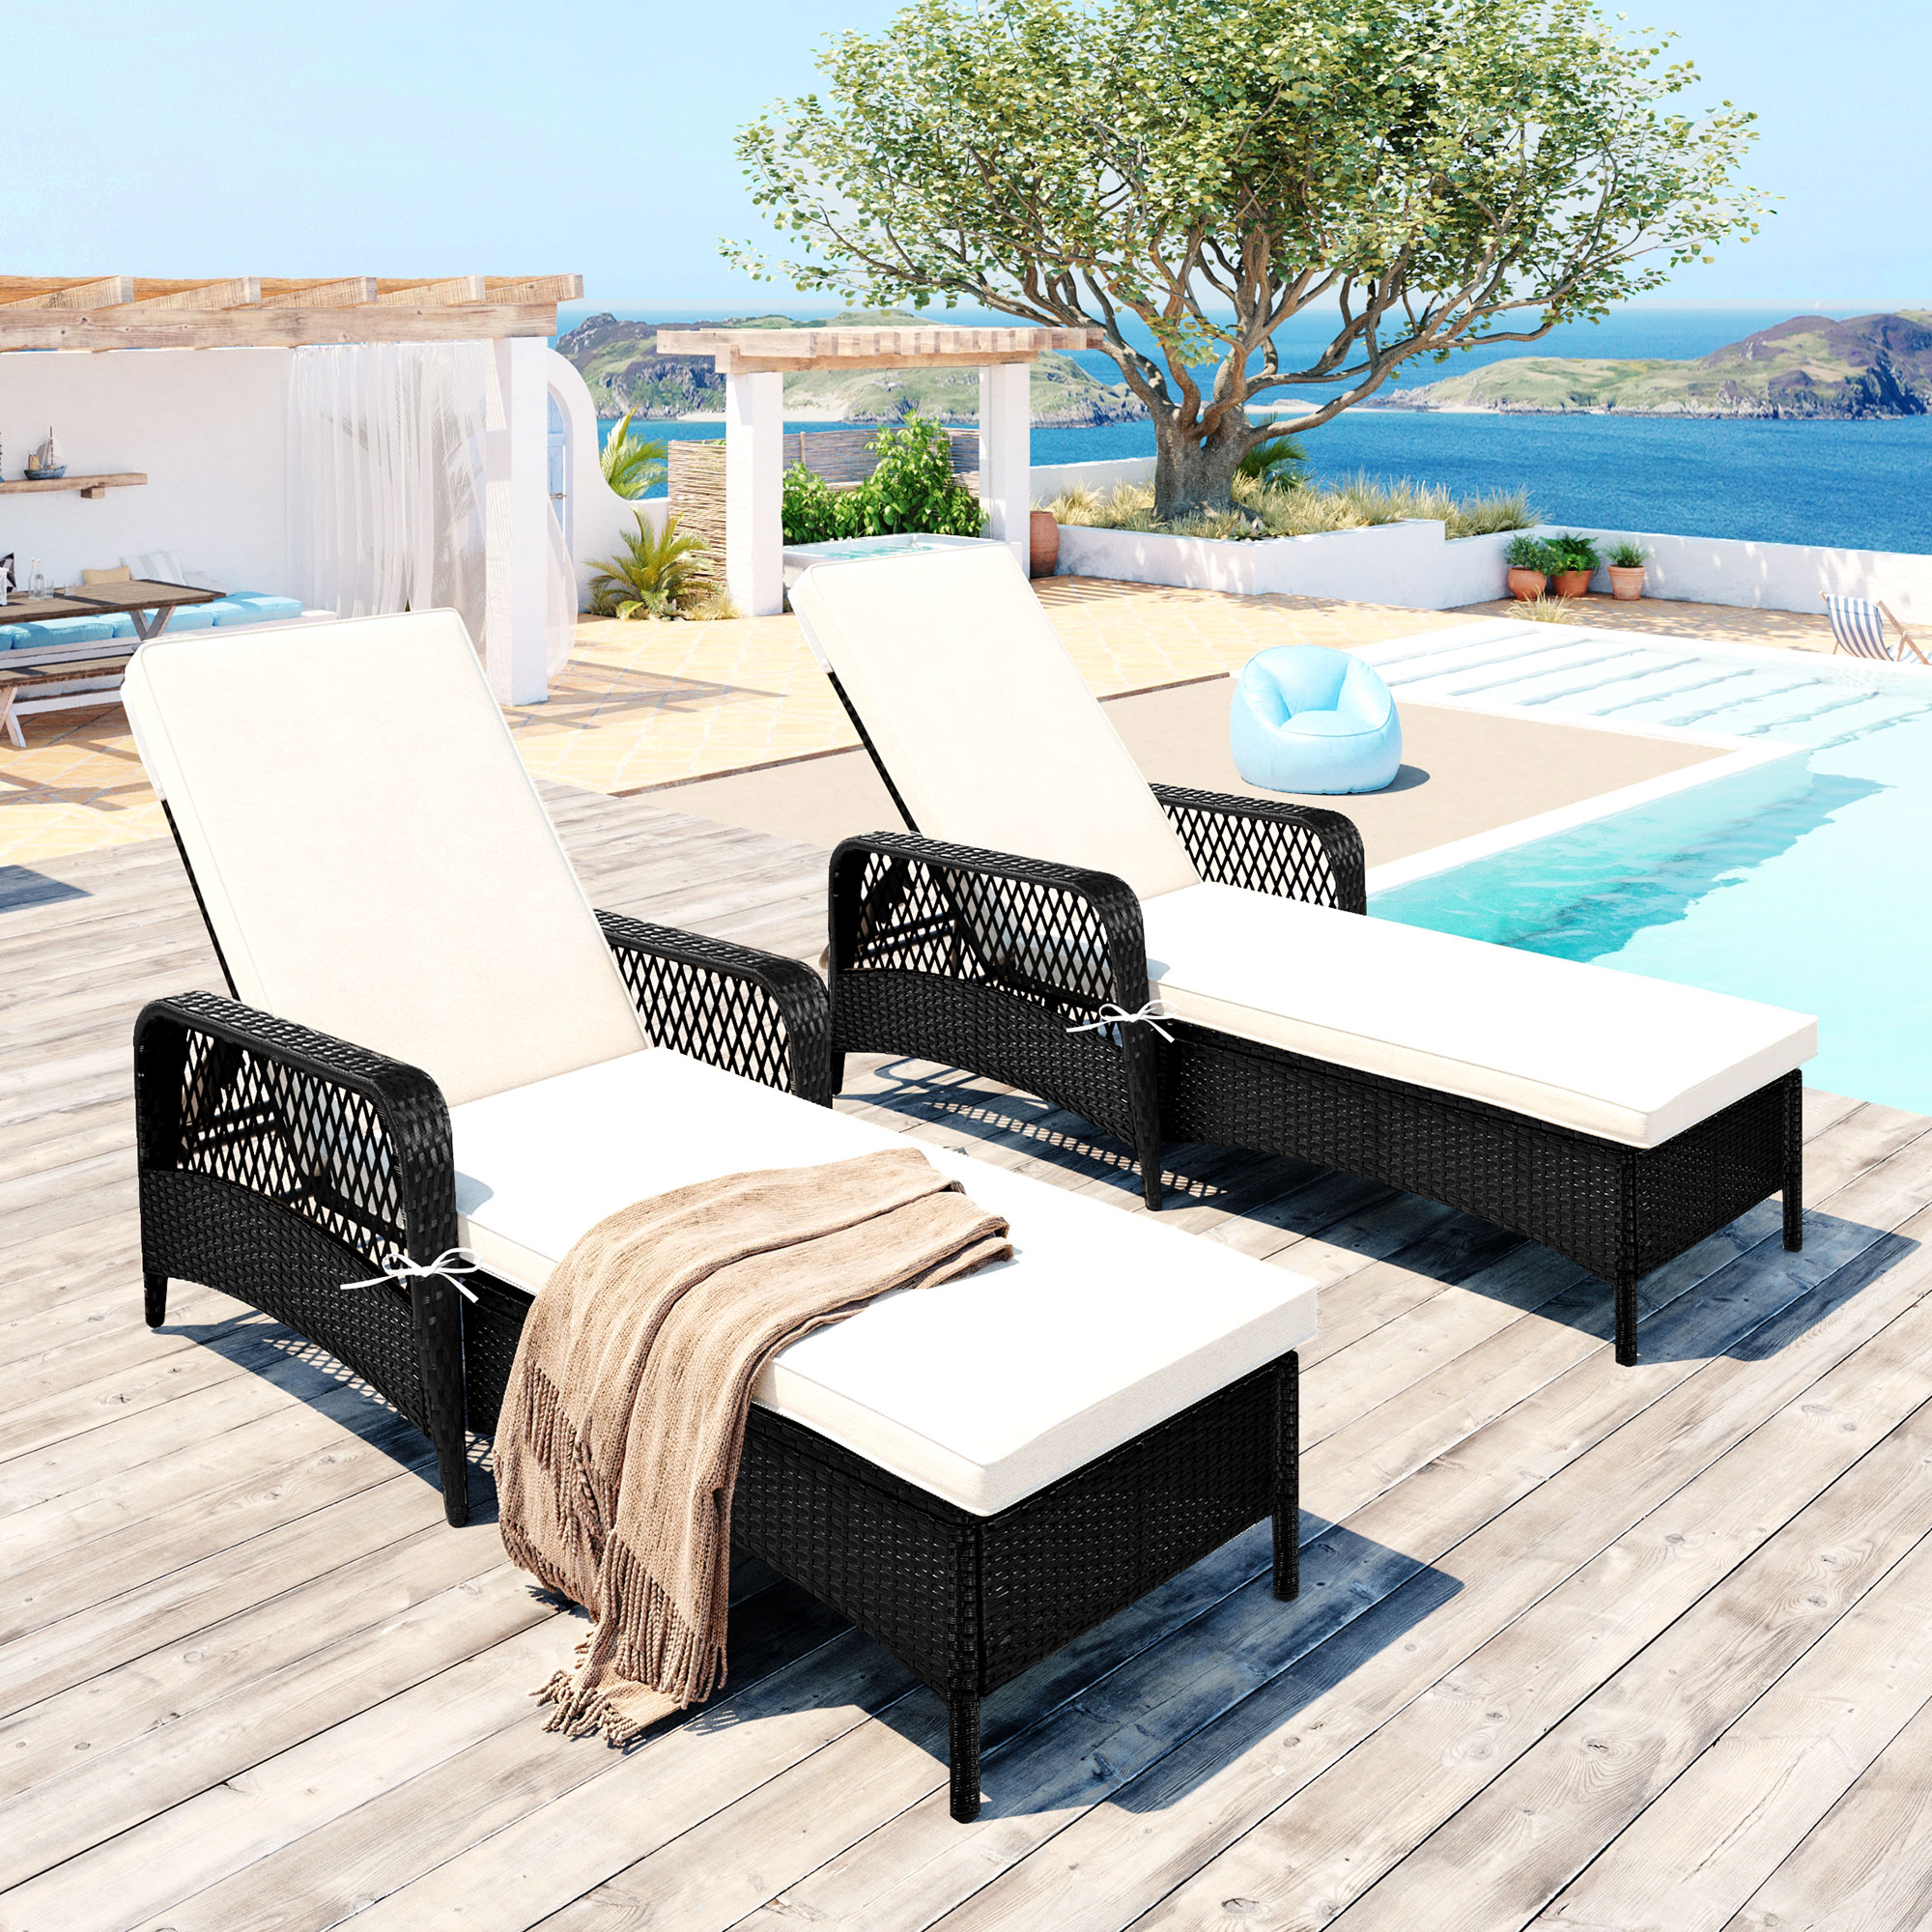 ENYOPRO 2 Piece Outdoor Patio Chaise Lounge Set, PE Wicker Lounge Chairs with Adjustable Backrest Recliners, Reclining Chair Furniture Set with Cushions for Pool Deck Patio Garden, K2689 - image 1 of 10